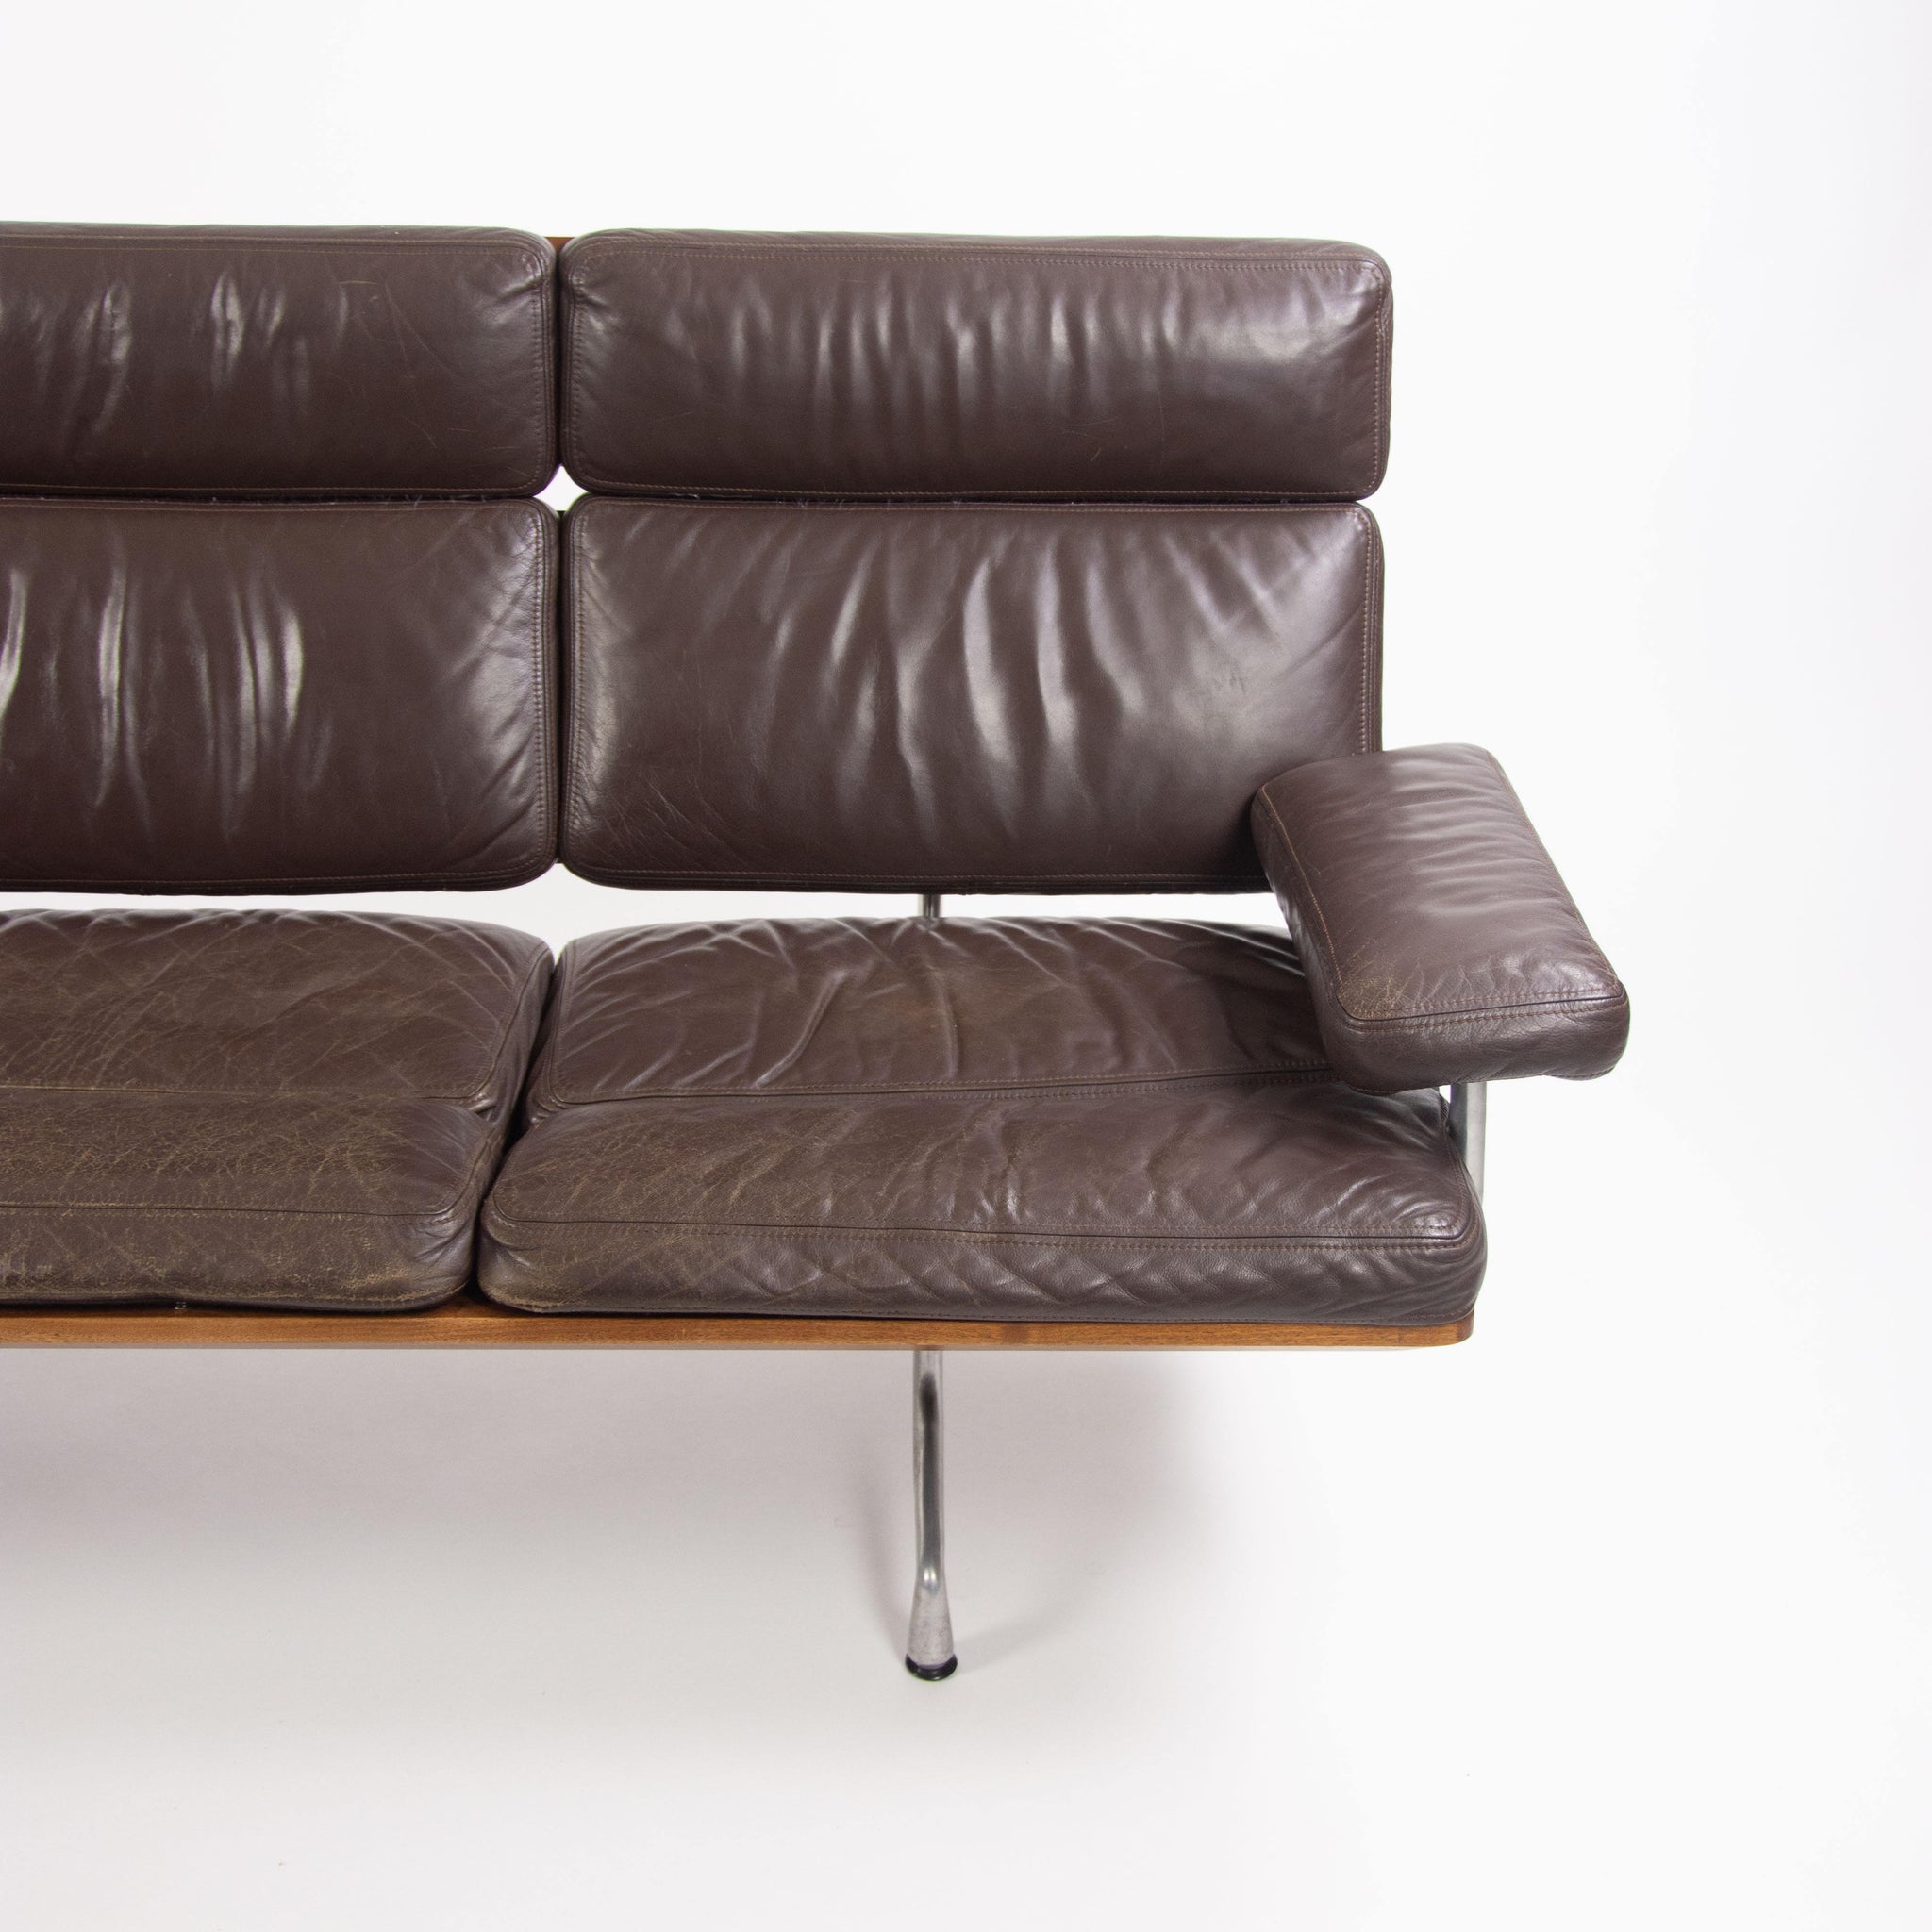 1980s Vintage Eames Herman Miller Three Seater Sofa Walnut and Brown Leather #2 - Rarify Inc.